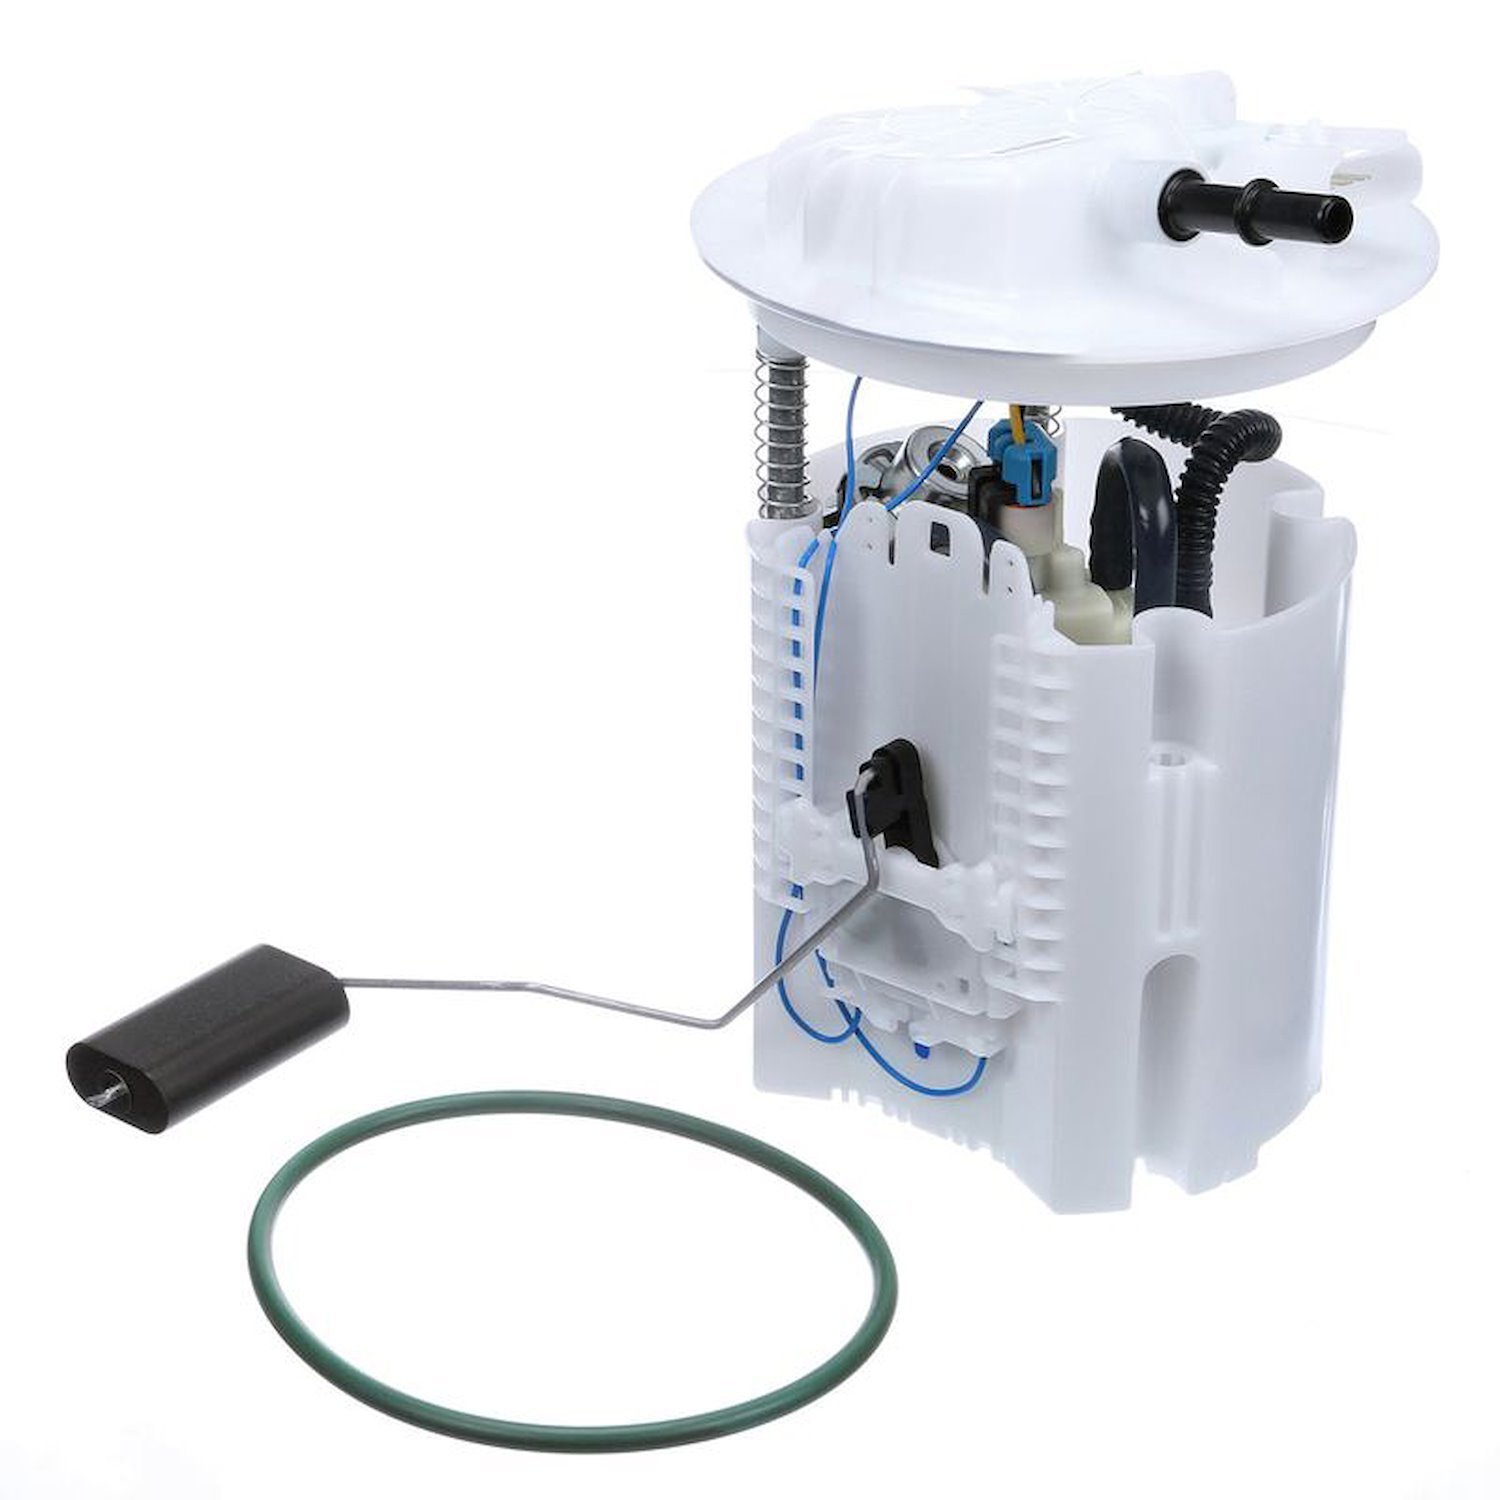 OE Chrysler/Dodge Replacement Electric Fuel Pump Module Assembly for 2011-2014 Chrysler 200/Dodge Avenger